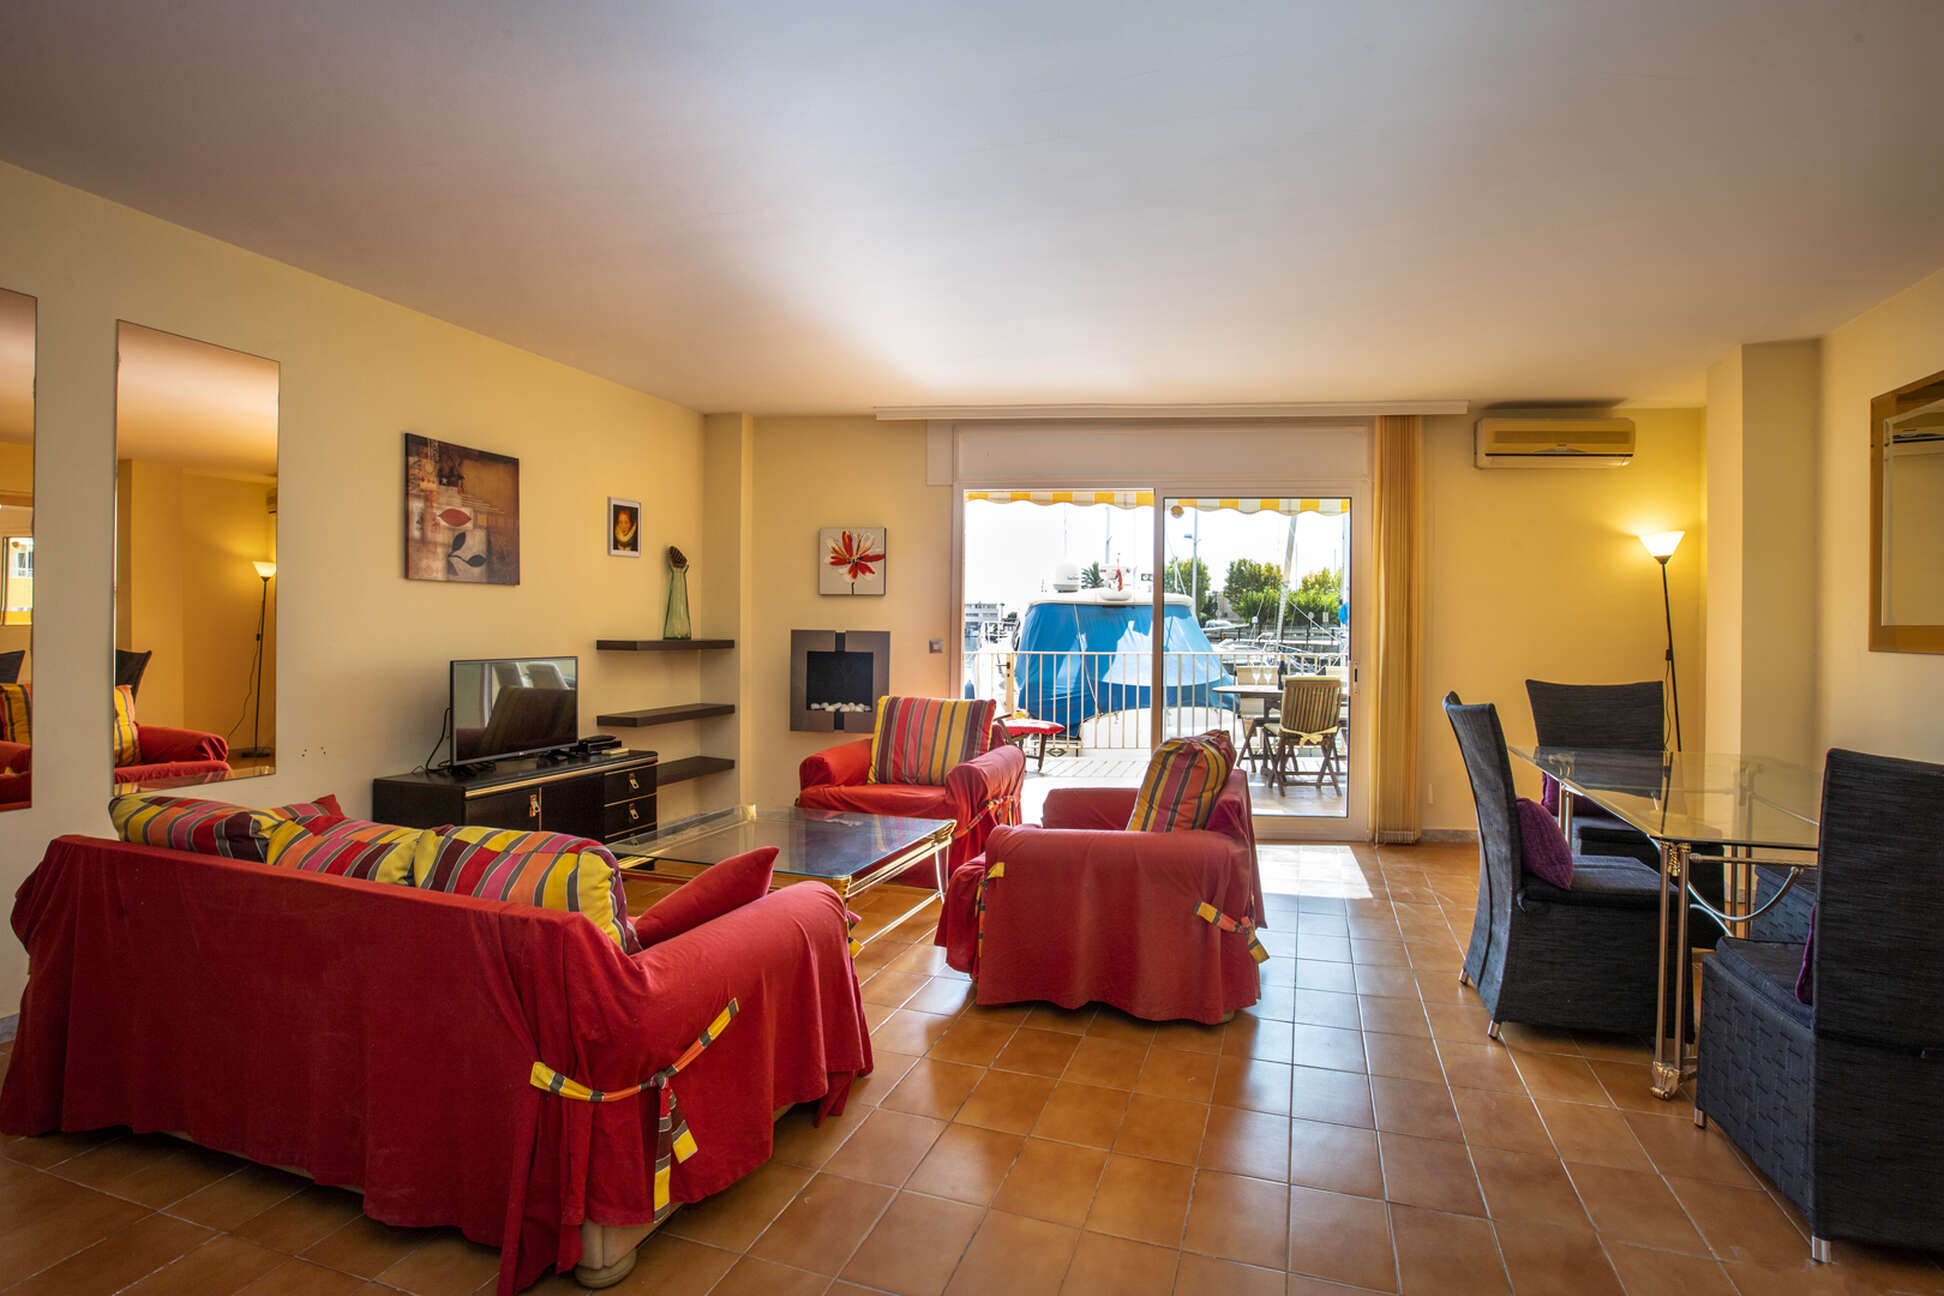 Nice apartment in the center of Empuriabrava overlooking a private port